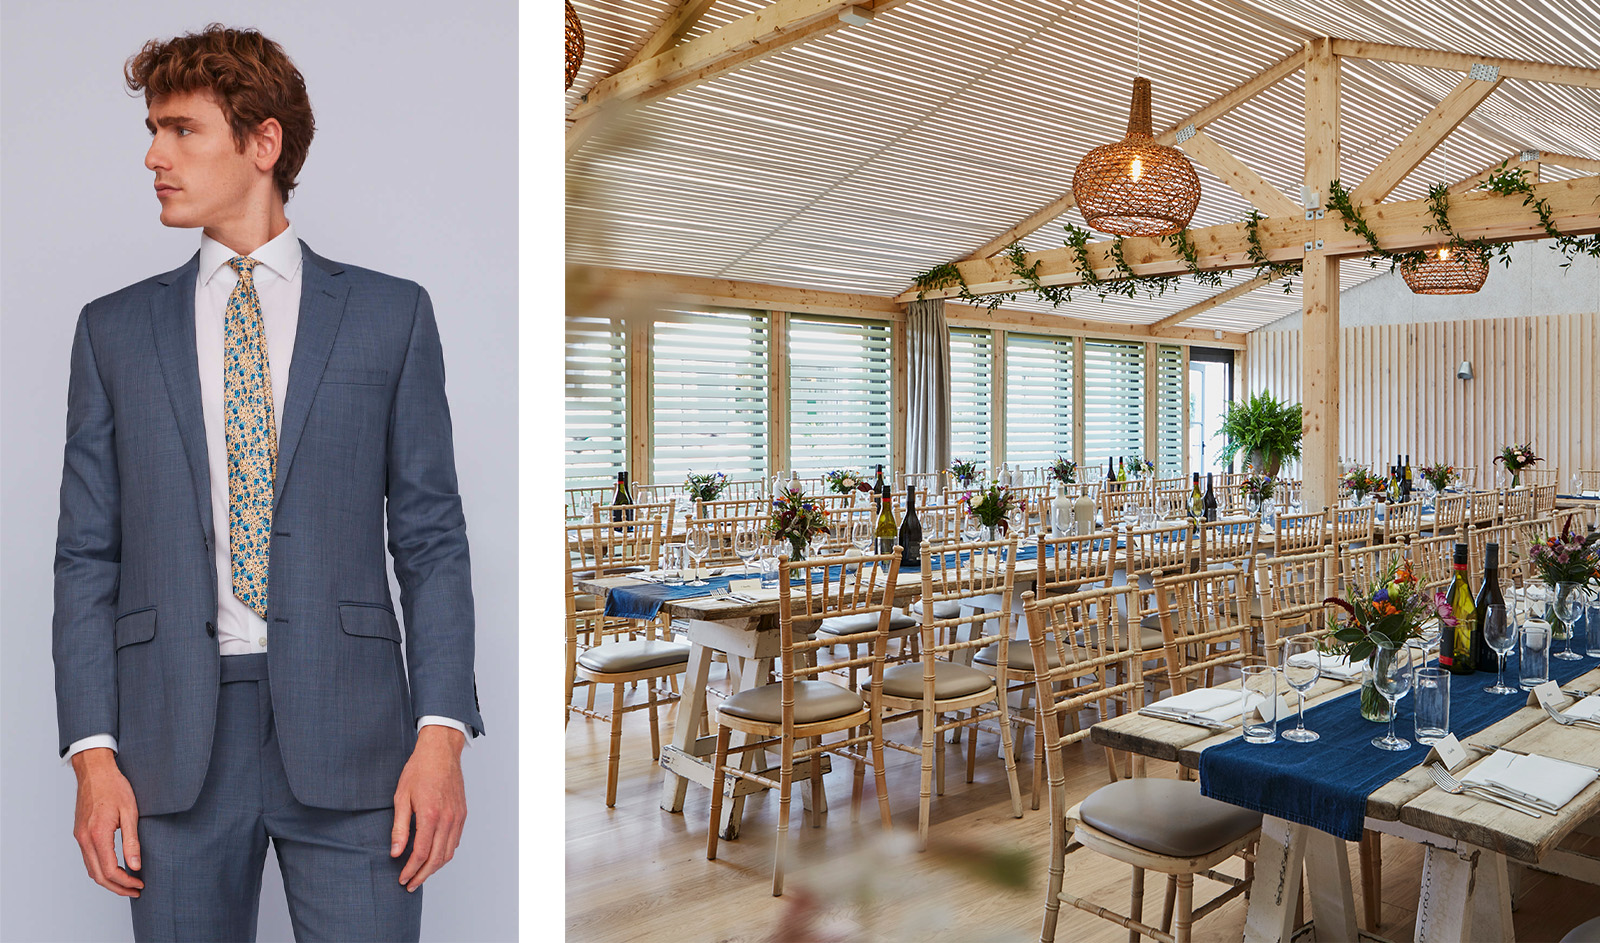 coastal venue and wedding suit by moss bros